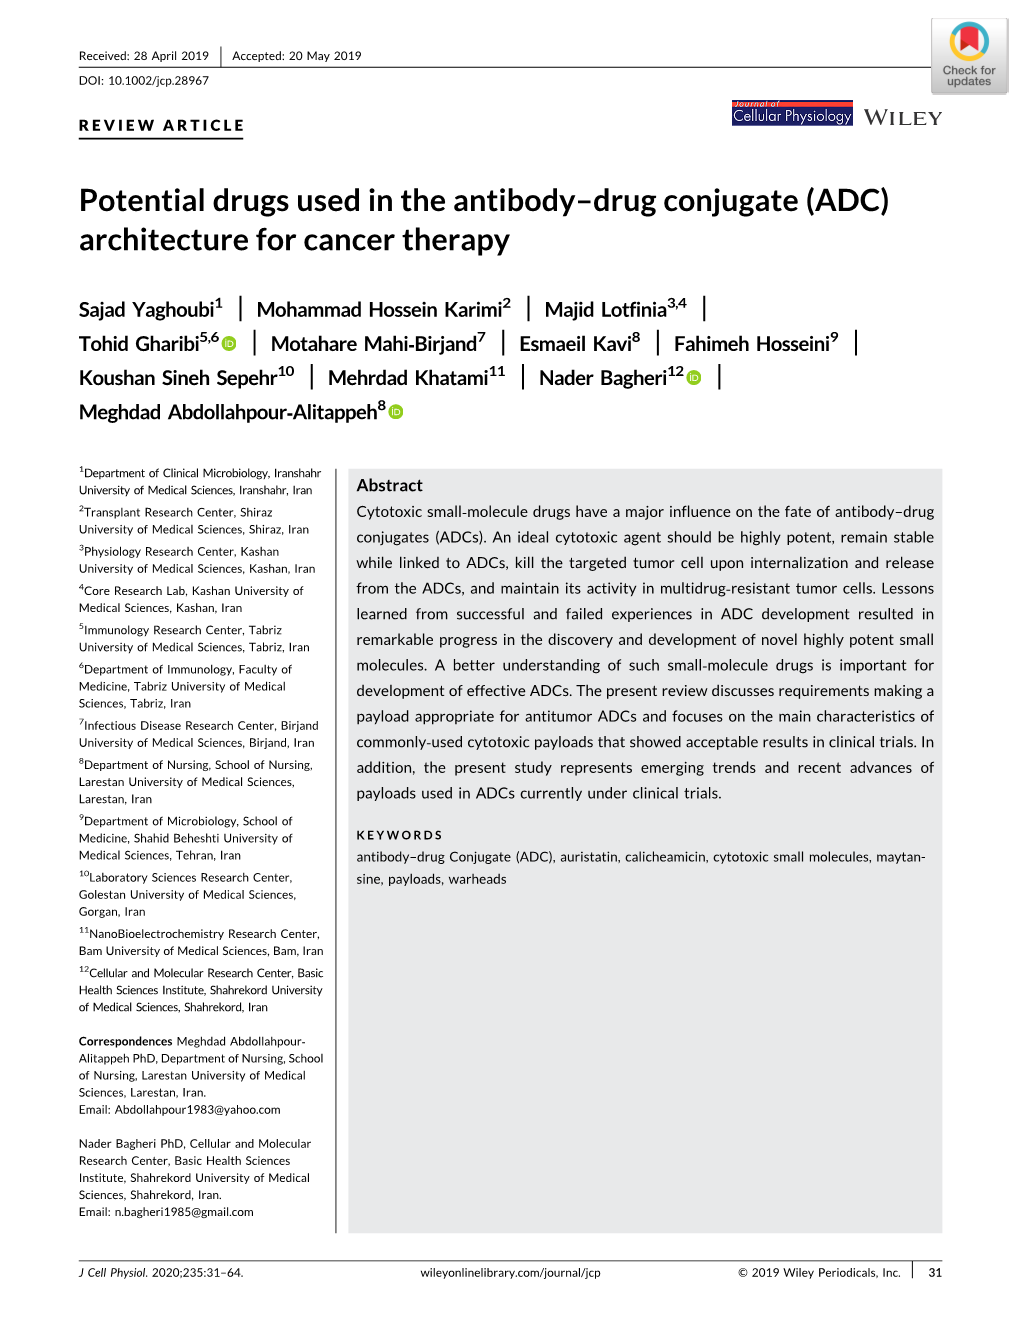 Potential Drugs Used in the Antibody–Drug Conjugate (ADC) Architecture for Cancer Therapy